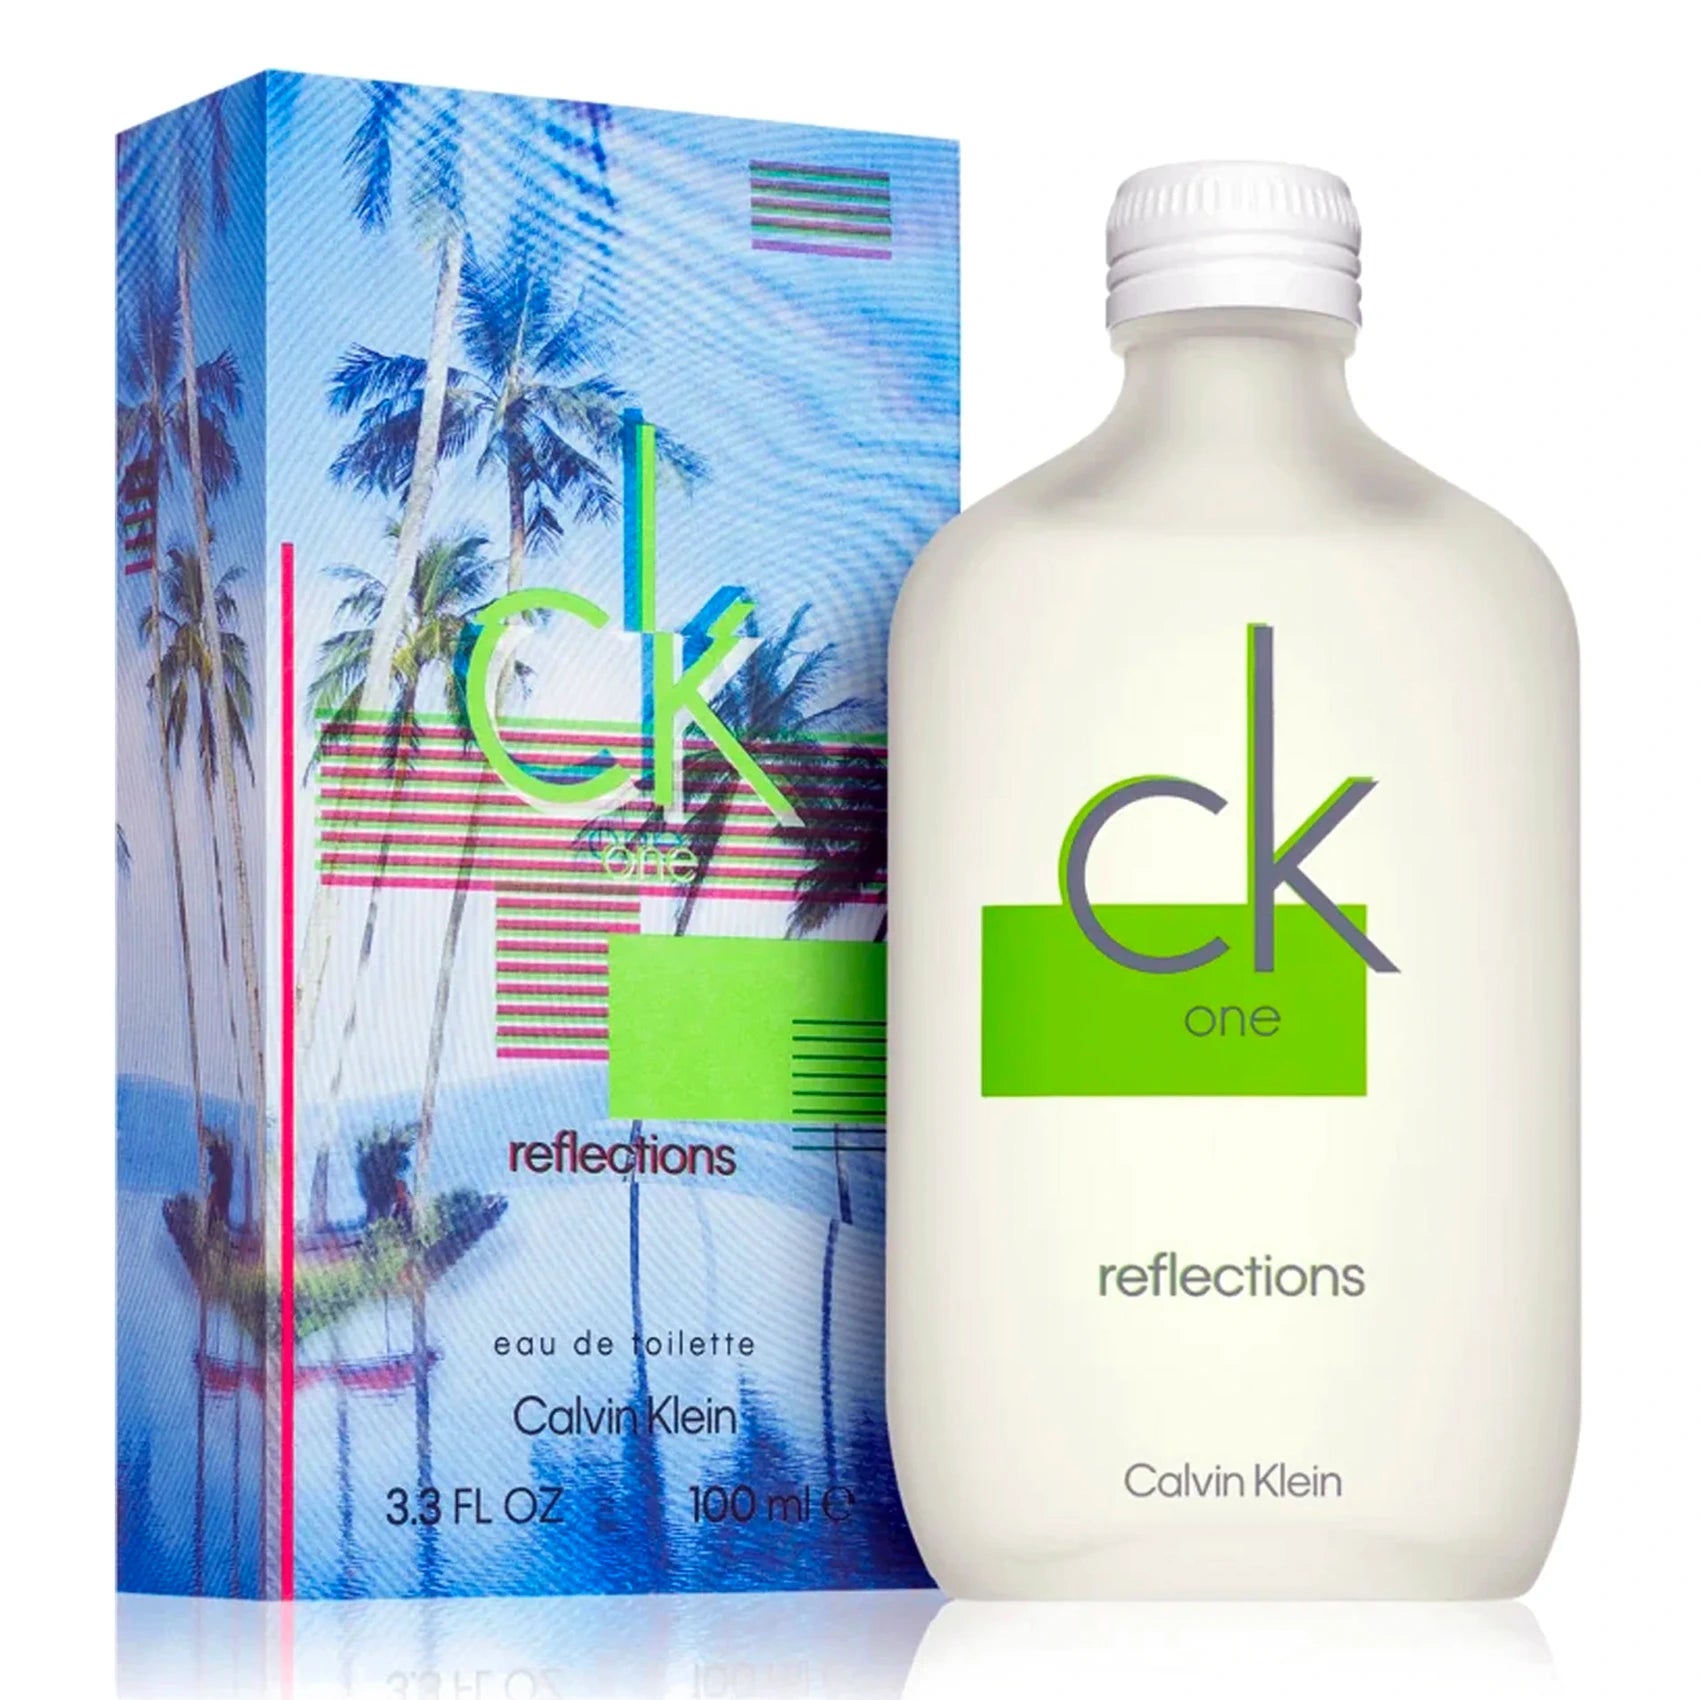 <span data-mce-fragment="1"></span>
<p data-mce-fragment="1">Feel invigorated and inspired this summer with CK One Reflections. This vegan Eau de Toilette carries a vibrant, energetic scent with natural ginger, frozen lime, sparkling green tea heart, and a sensual woody musk base. Its recycled flacon and 50.5% natural ingredients provide an eco-friendly olfactory experience that will bring light and joy to your day.</p>
<br><span data-mce-fragment="1"></span>